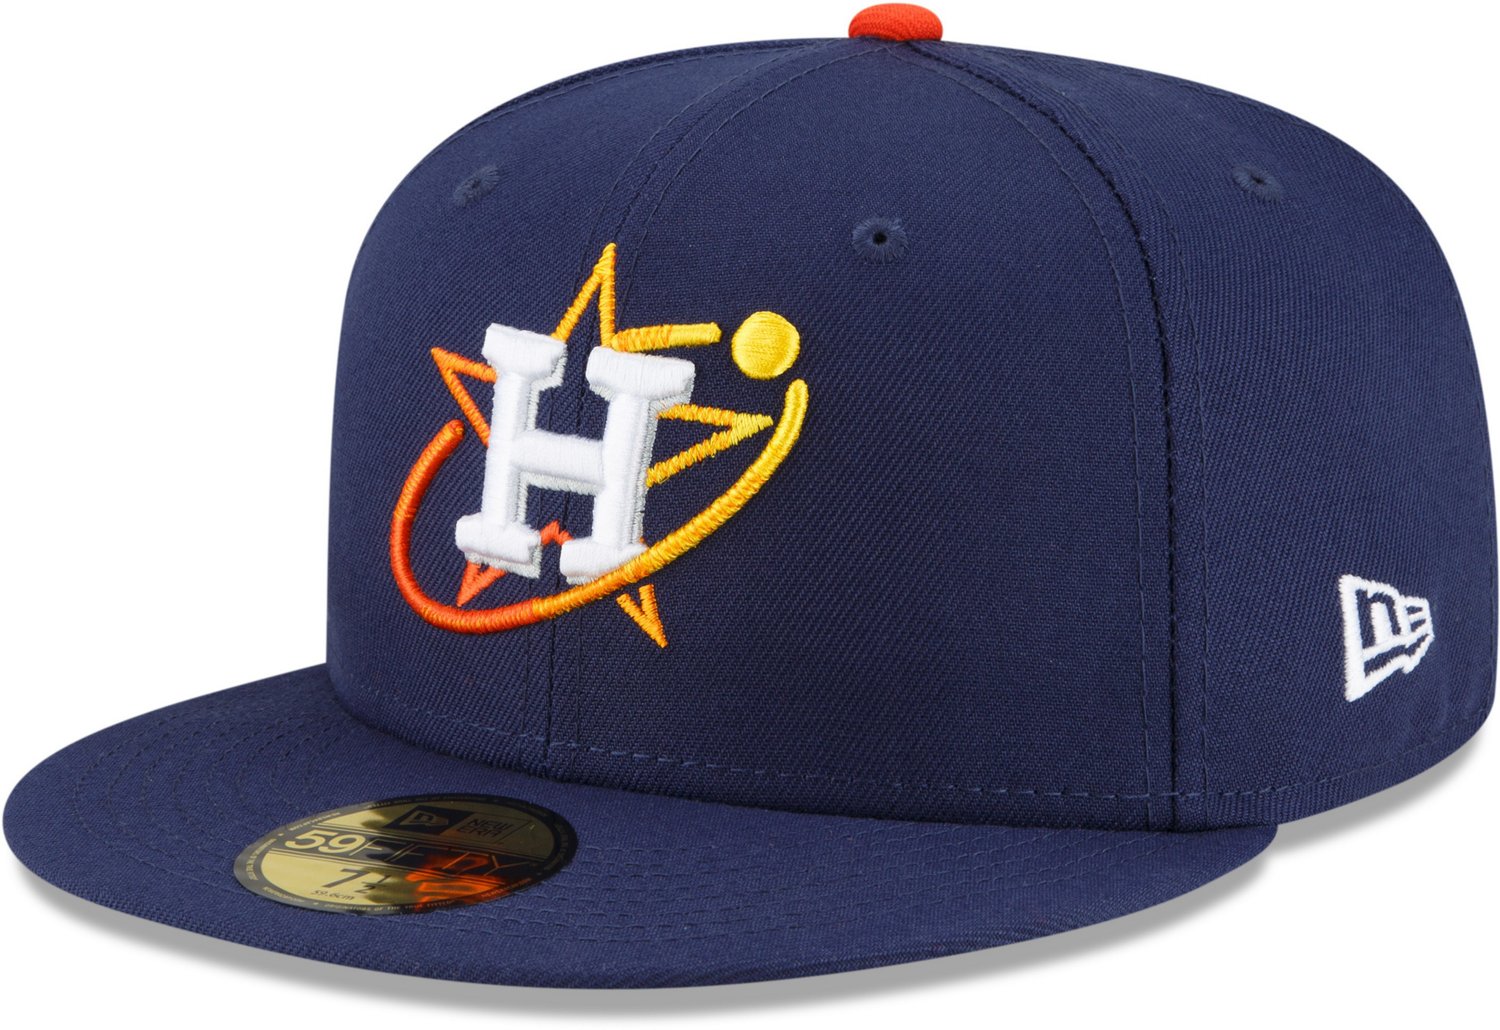  MLB Houston Astros Black with White 59FIFTY Fitted Cap, 6 7/8  : Sports Fan Baseball Caps : Sports & Outdoors